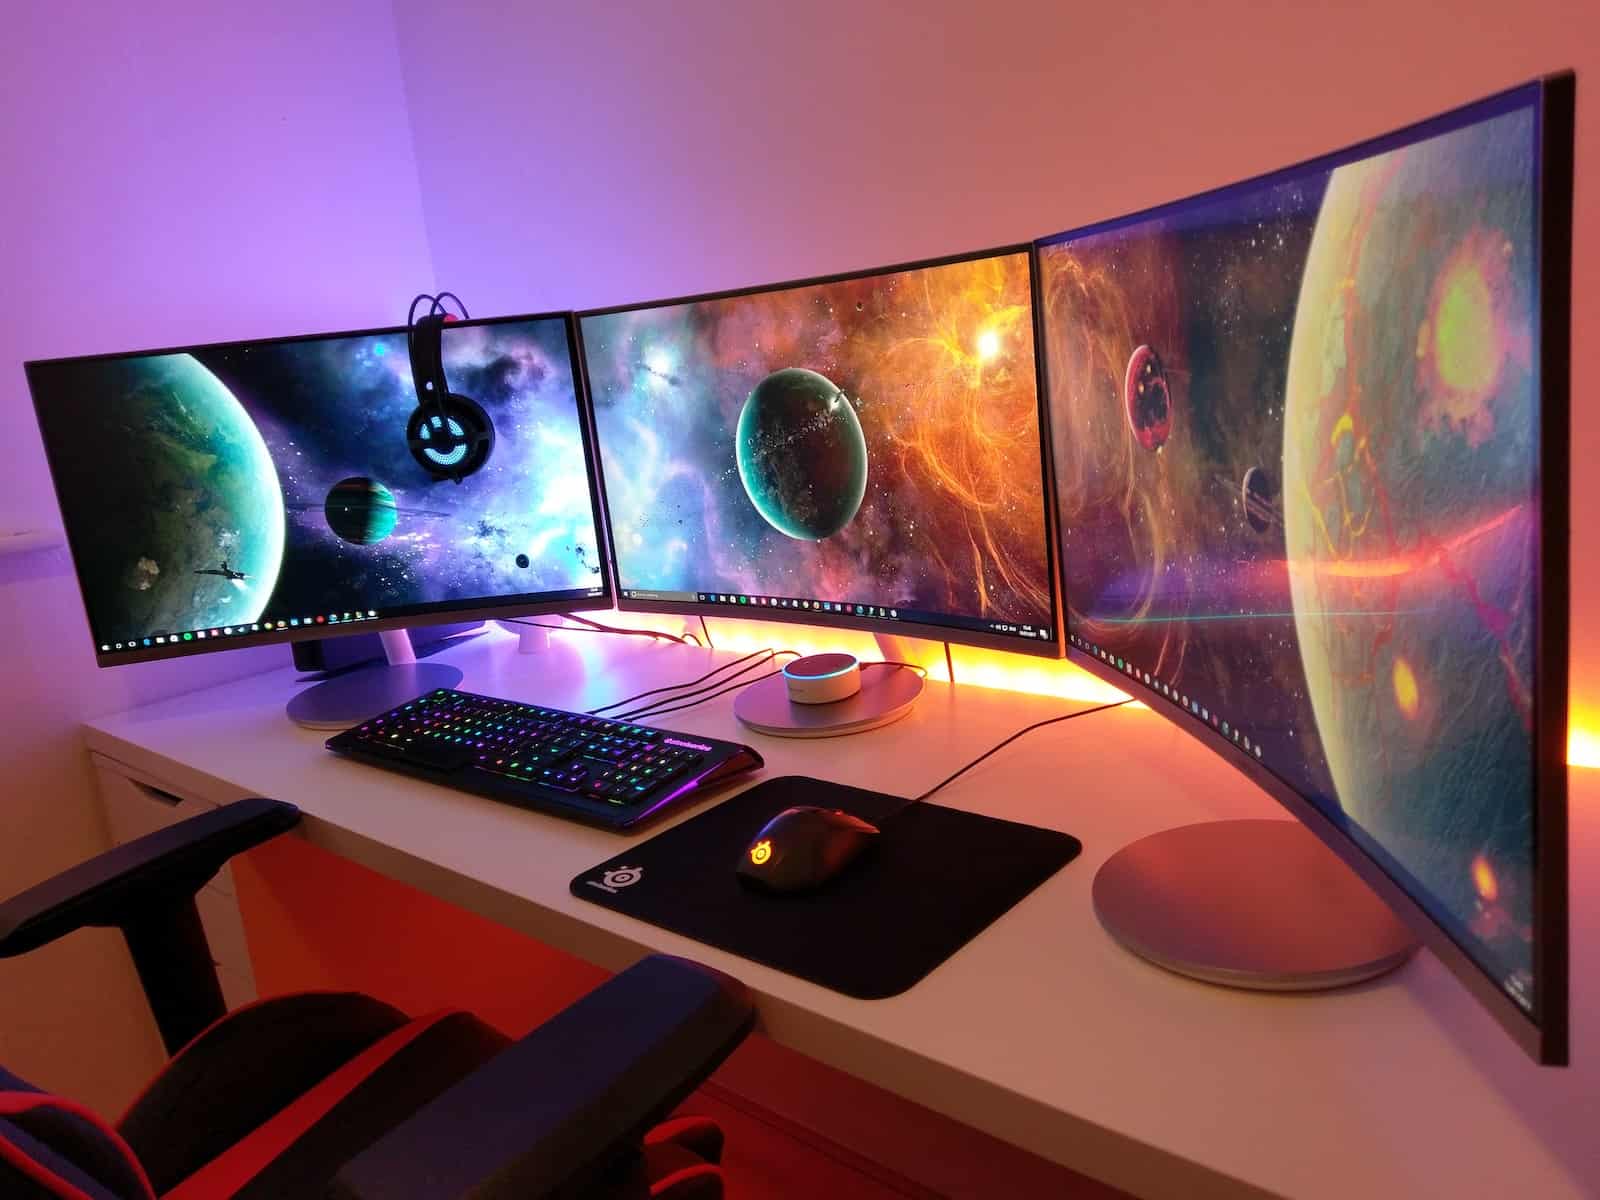 240Hz is the new 120Hz: It's time to buy a high refresh rate monitor